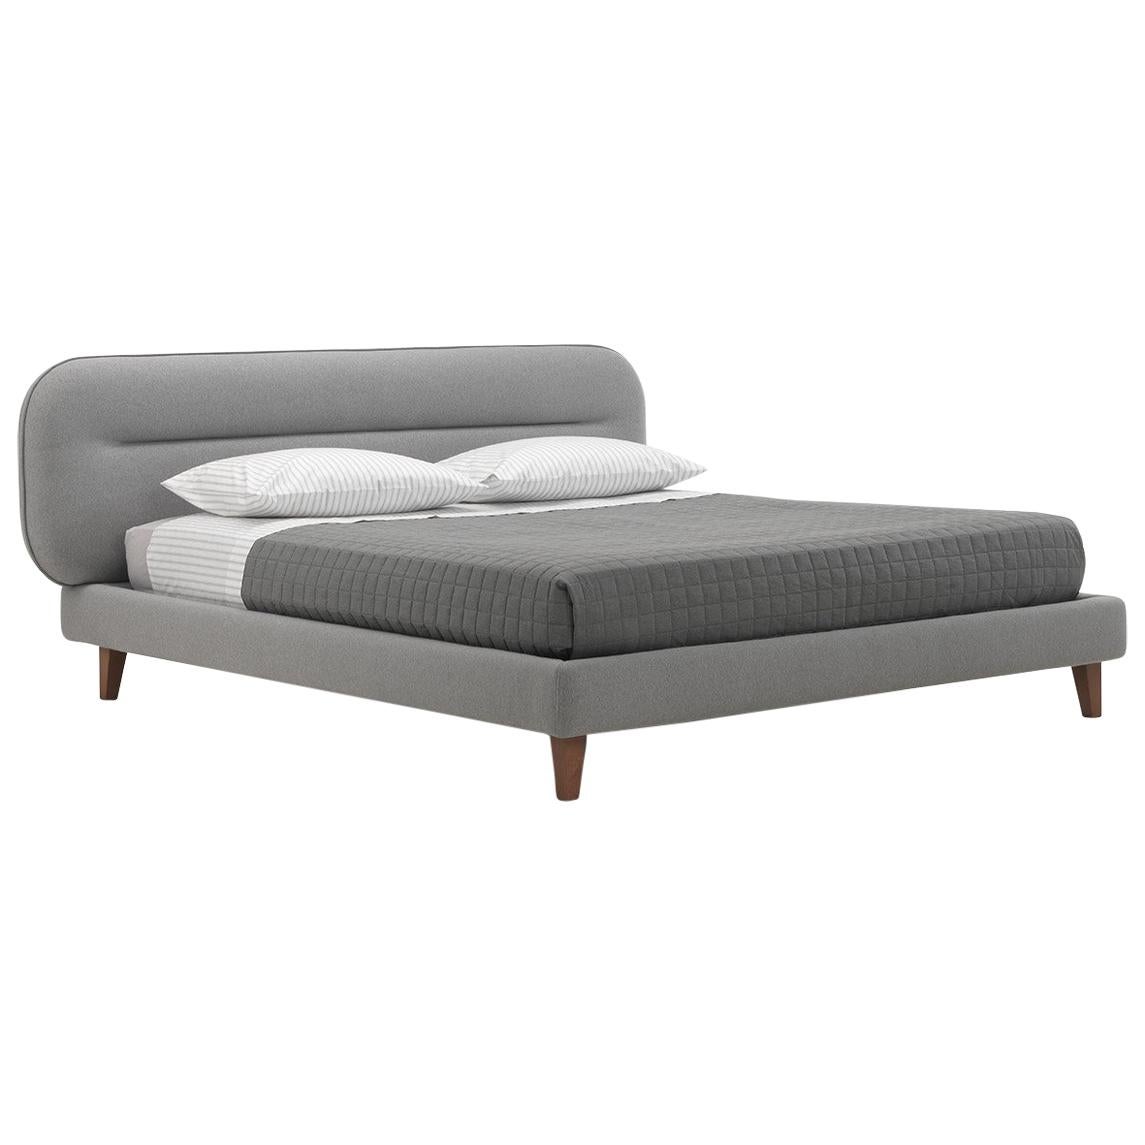 'VISCONTI' King Size Bed with Italian Modern Style Headboard in Grey Fleece For Sale